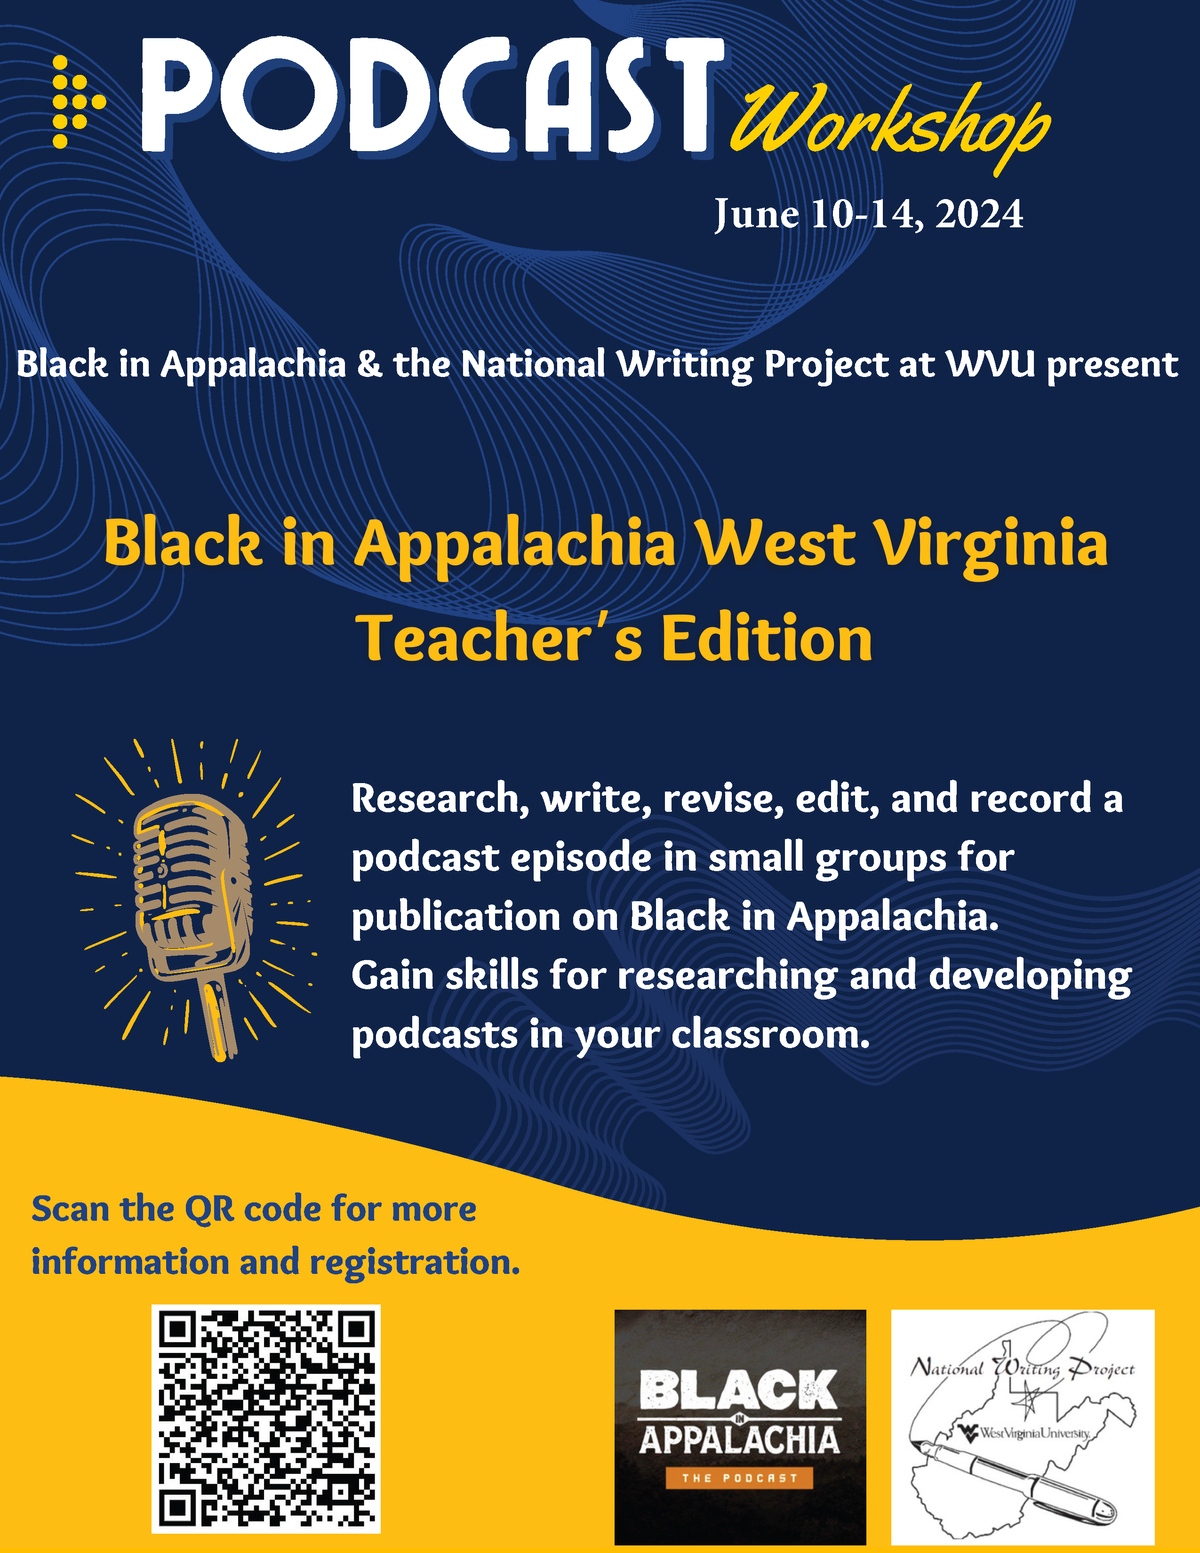 Research, write, revise, edit, and record a podcast episode in small groups for publication on Black in Appalachia. Gain skills for researching and developing podcasts in your classroom.